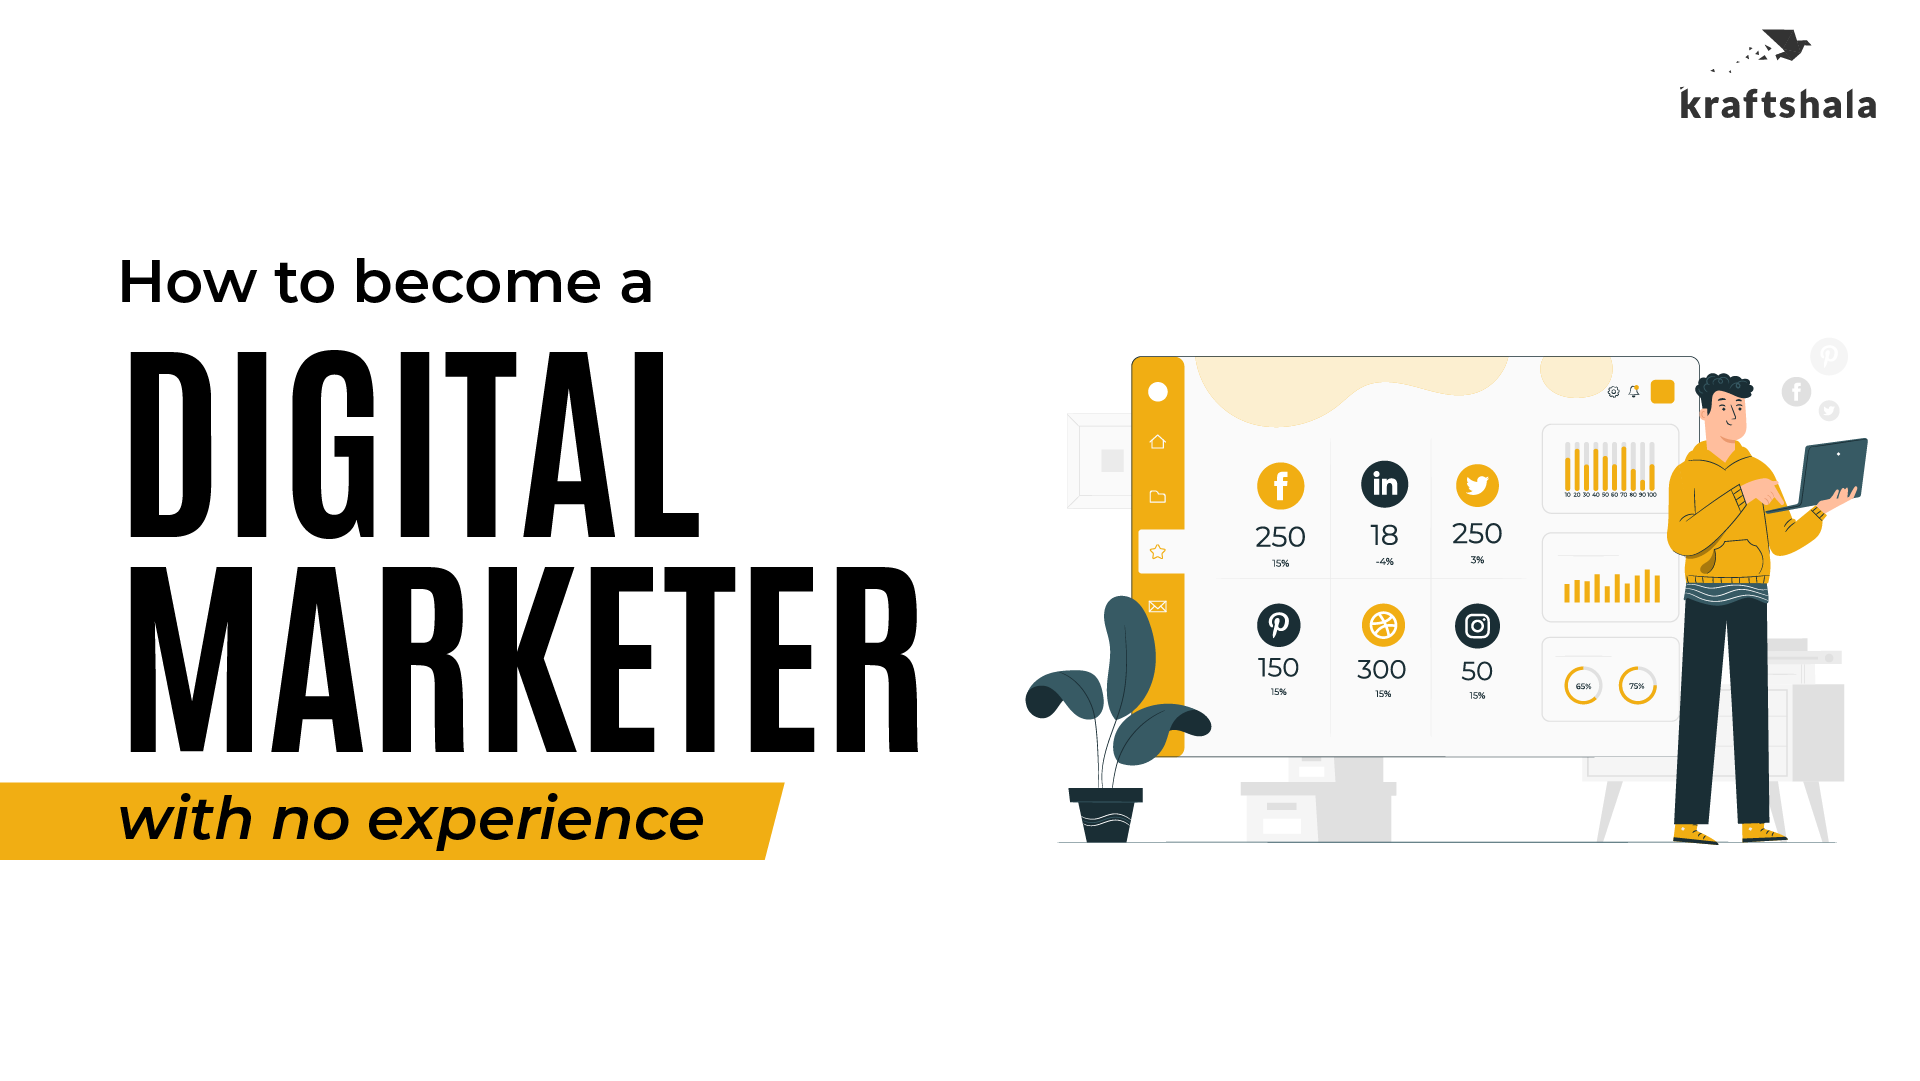 How to Become a Digital Marketer with No Experience in 3 Steps